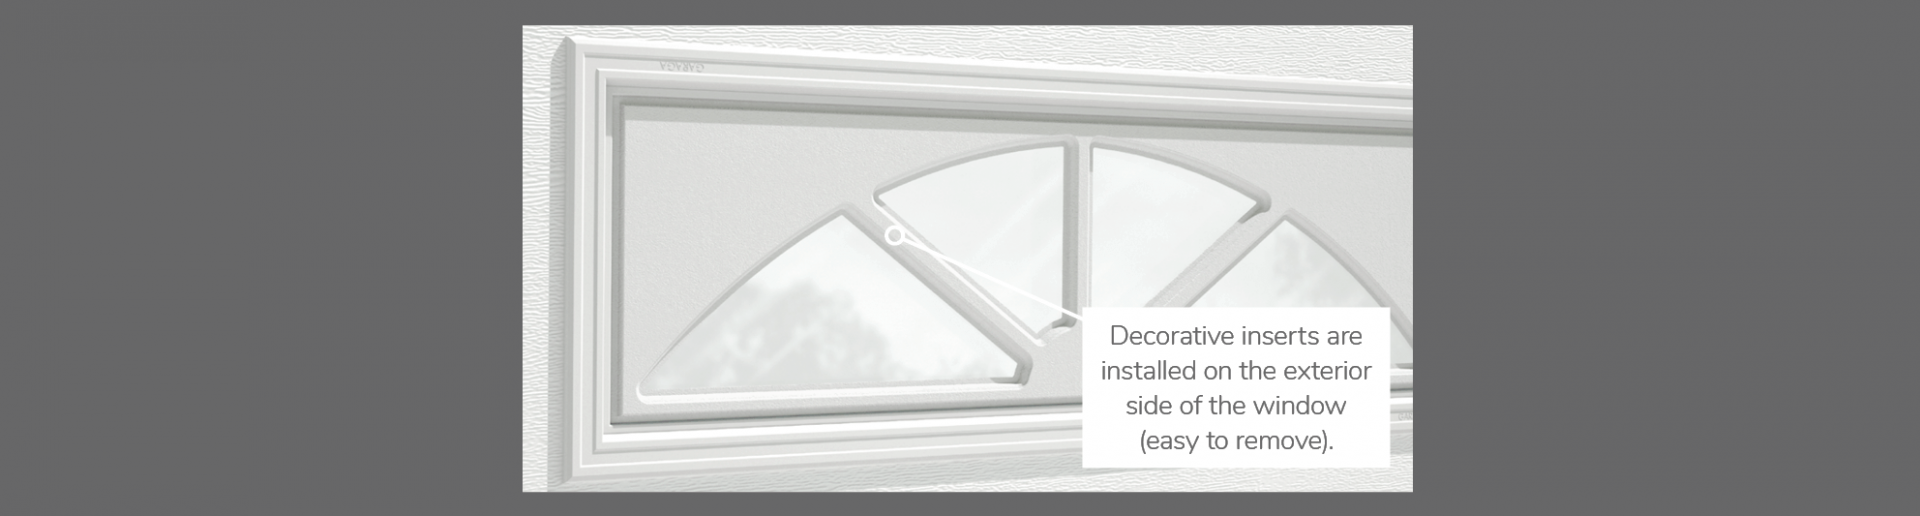 Sherwood Decorative Insert, 40" x 13", available for door R-16 and R-12